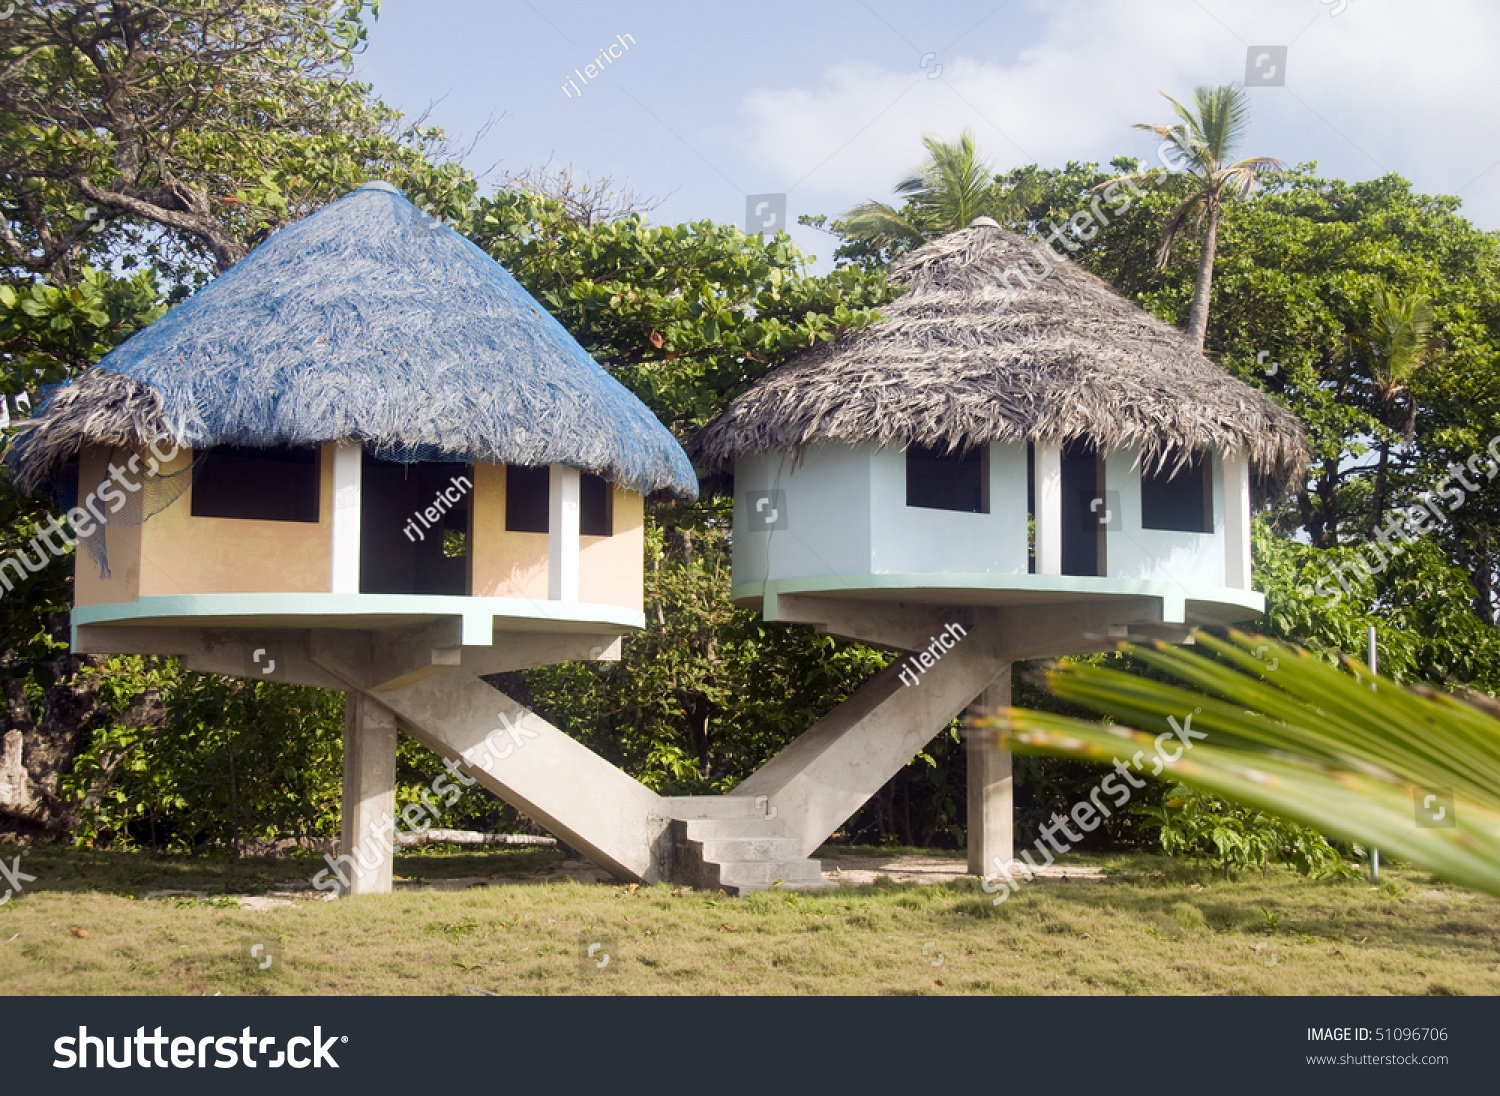 Thatched Roof Beach House With Outdoor Entertaining Spaces